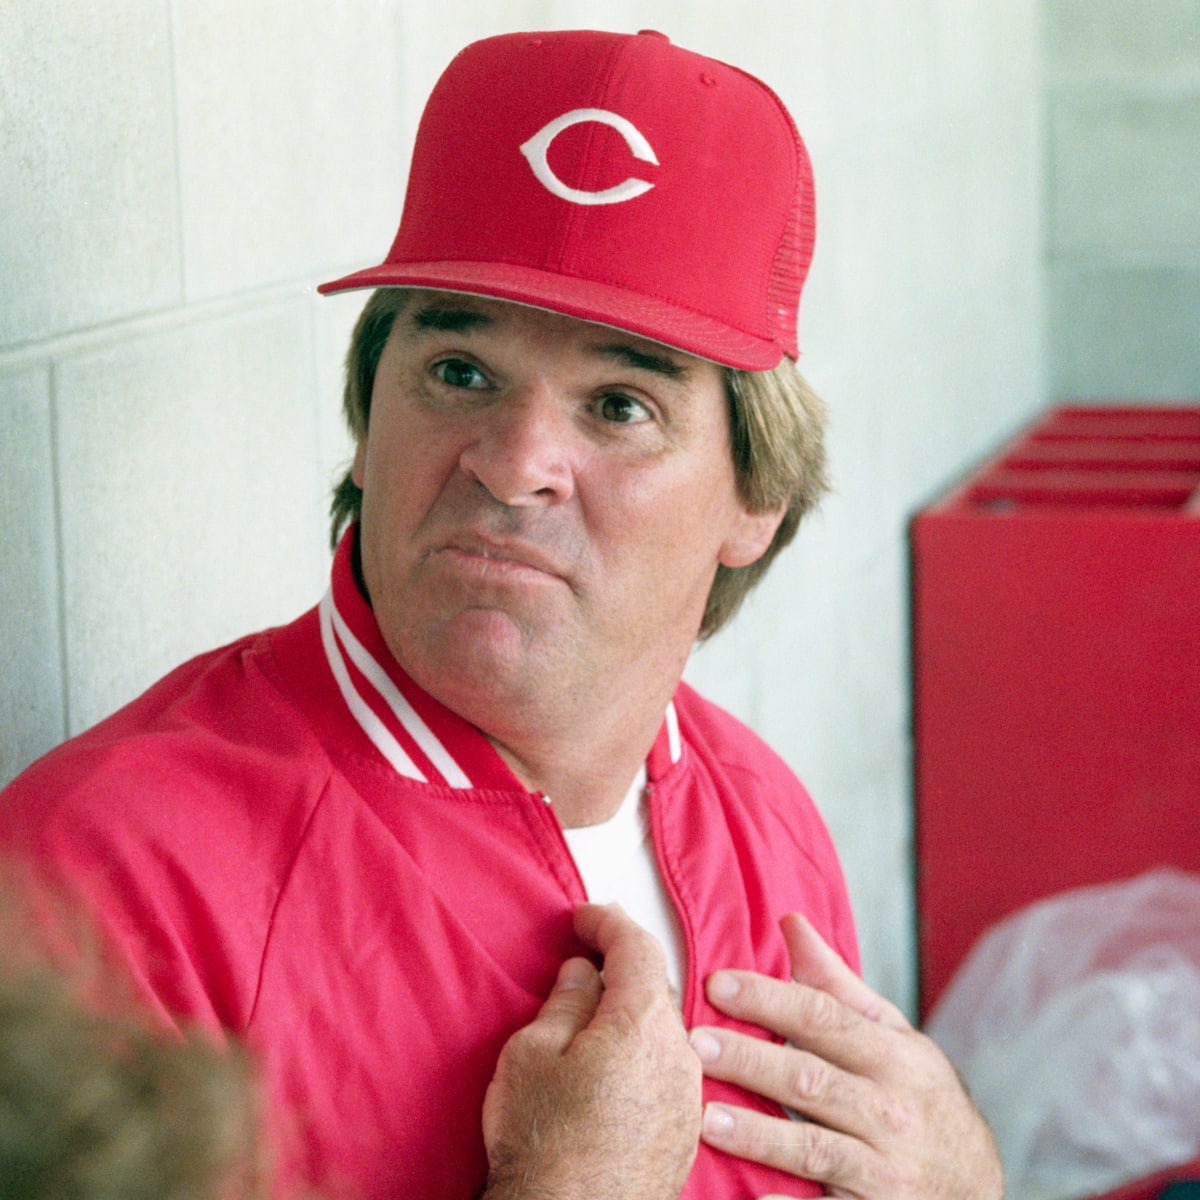 Current, former Reds saddened by Pete Rose news